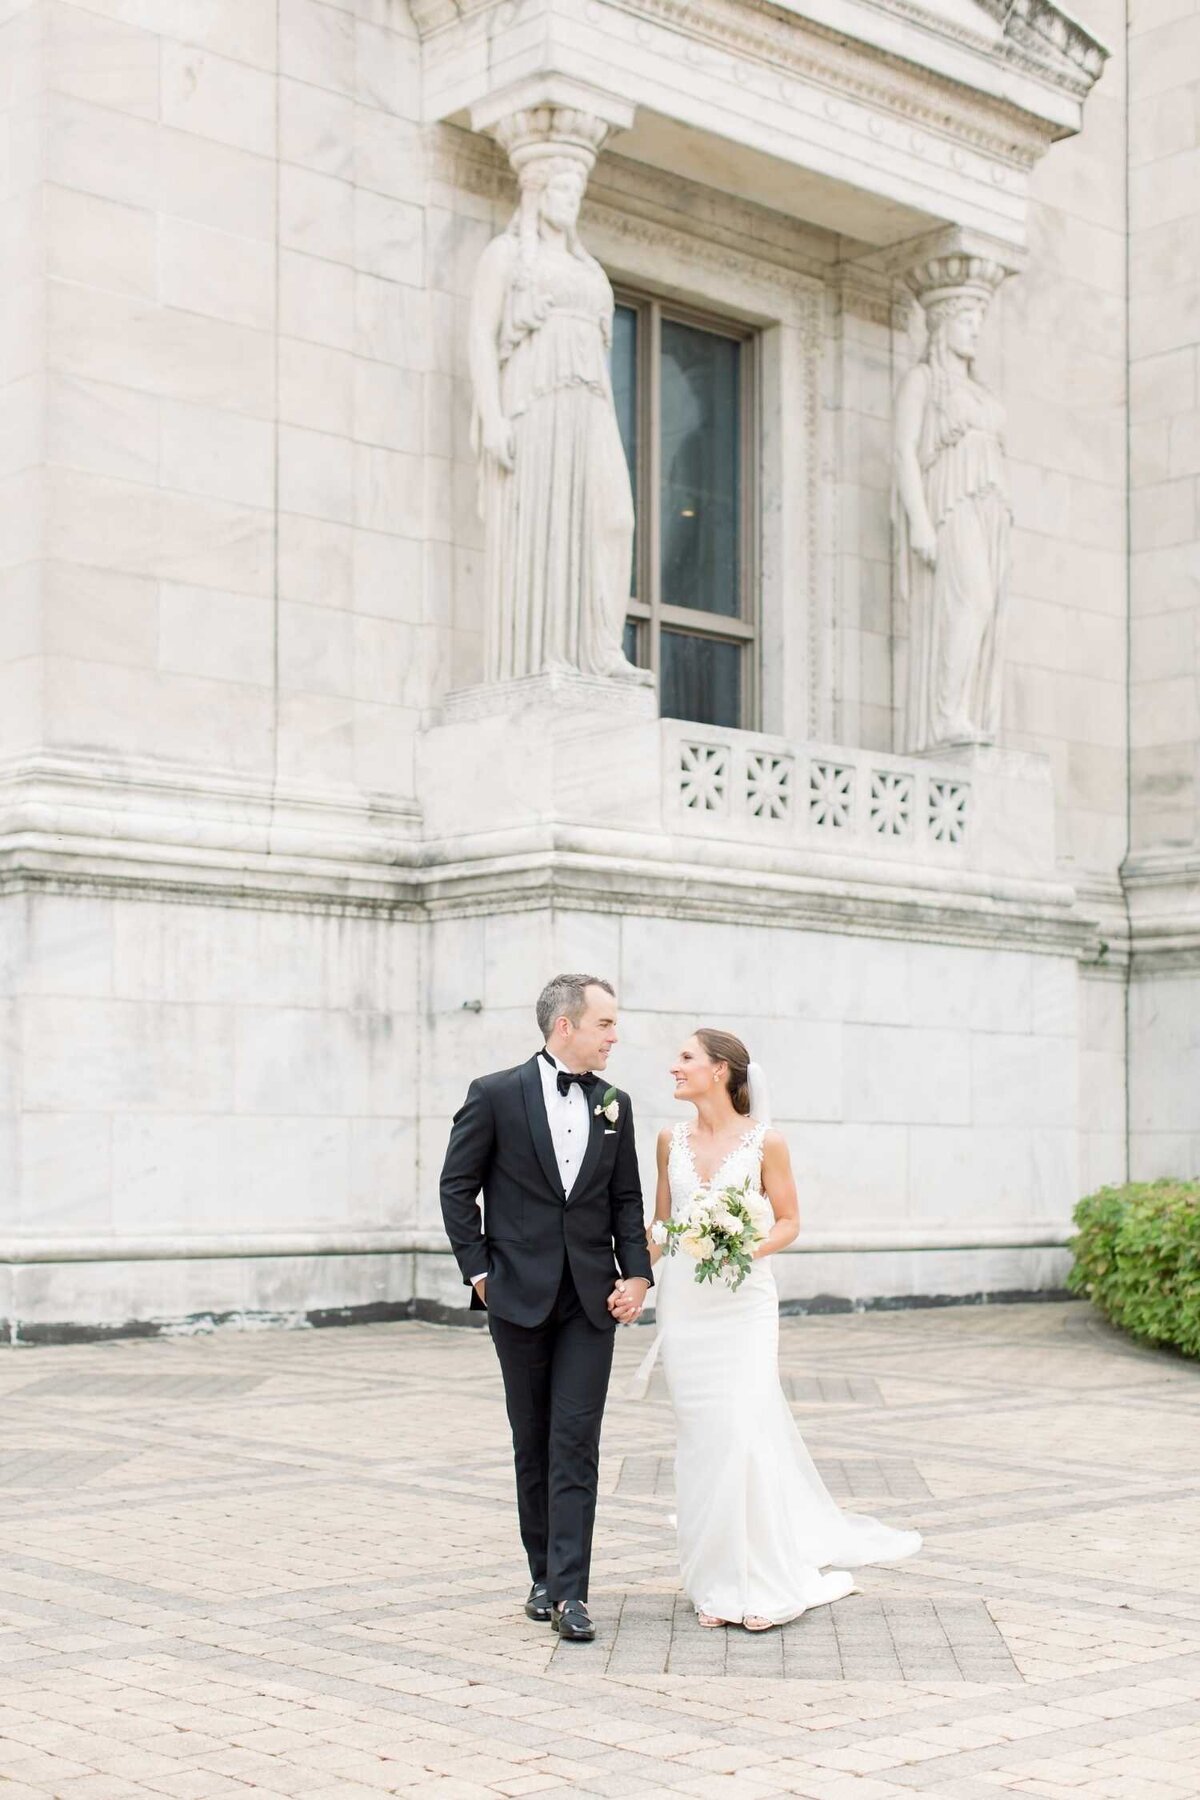 Bride and Groom photos outside the Field Museum for a summer wedding at Luxury Chicago Outdoor Historic Wedding Venue.